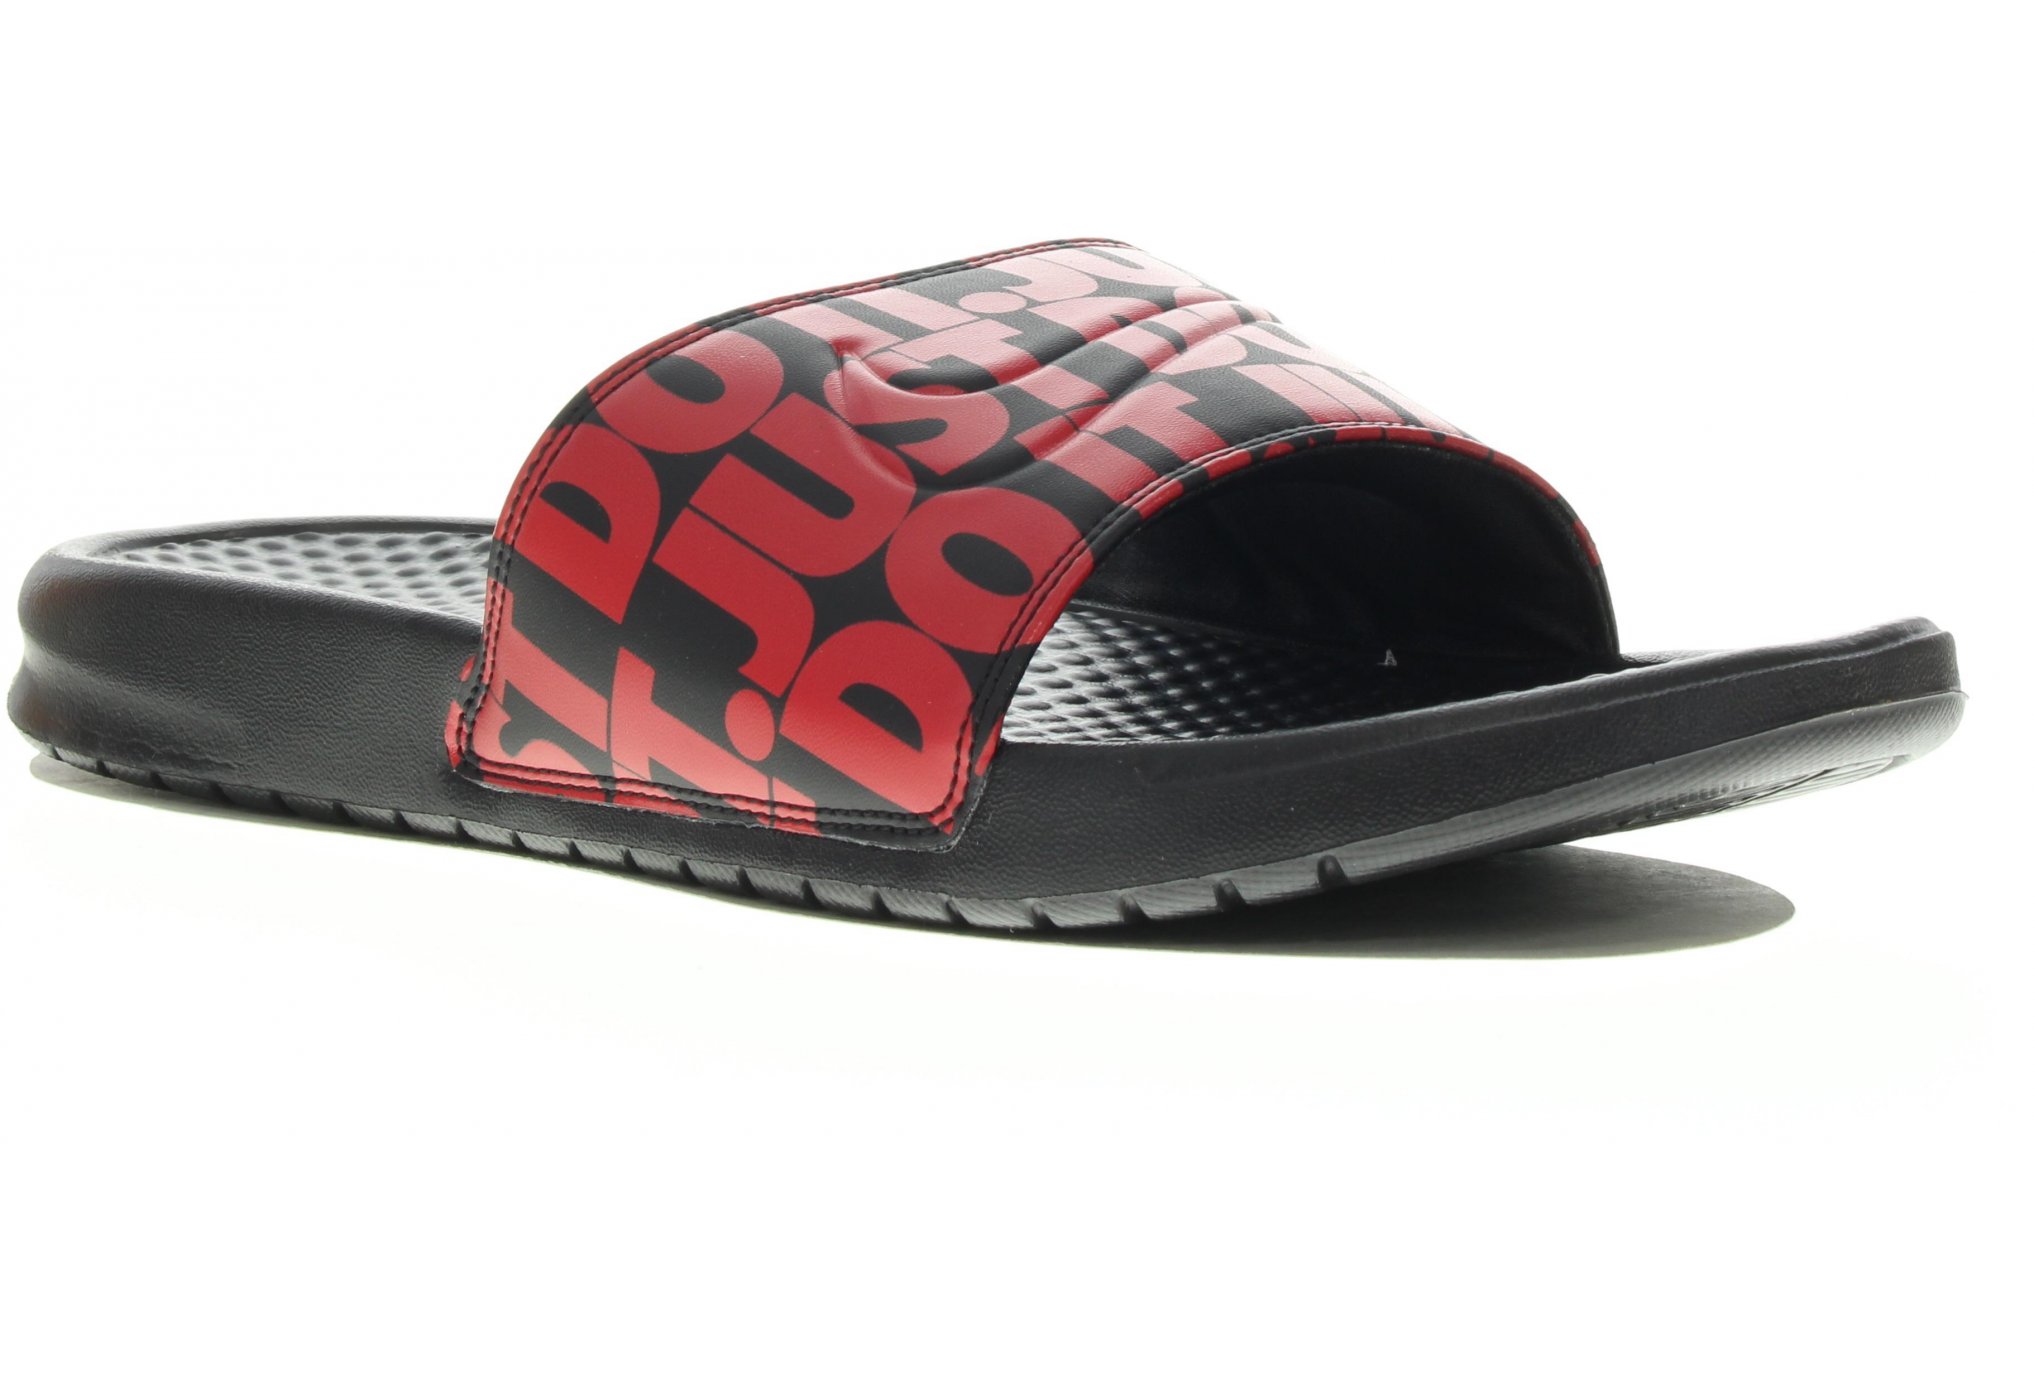 Nike Benassi jdi print m dittique chaussures homme